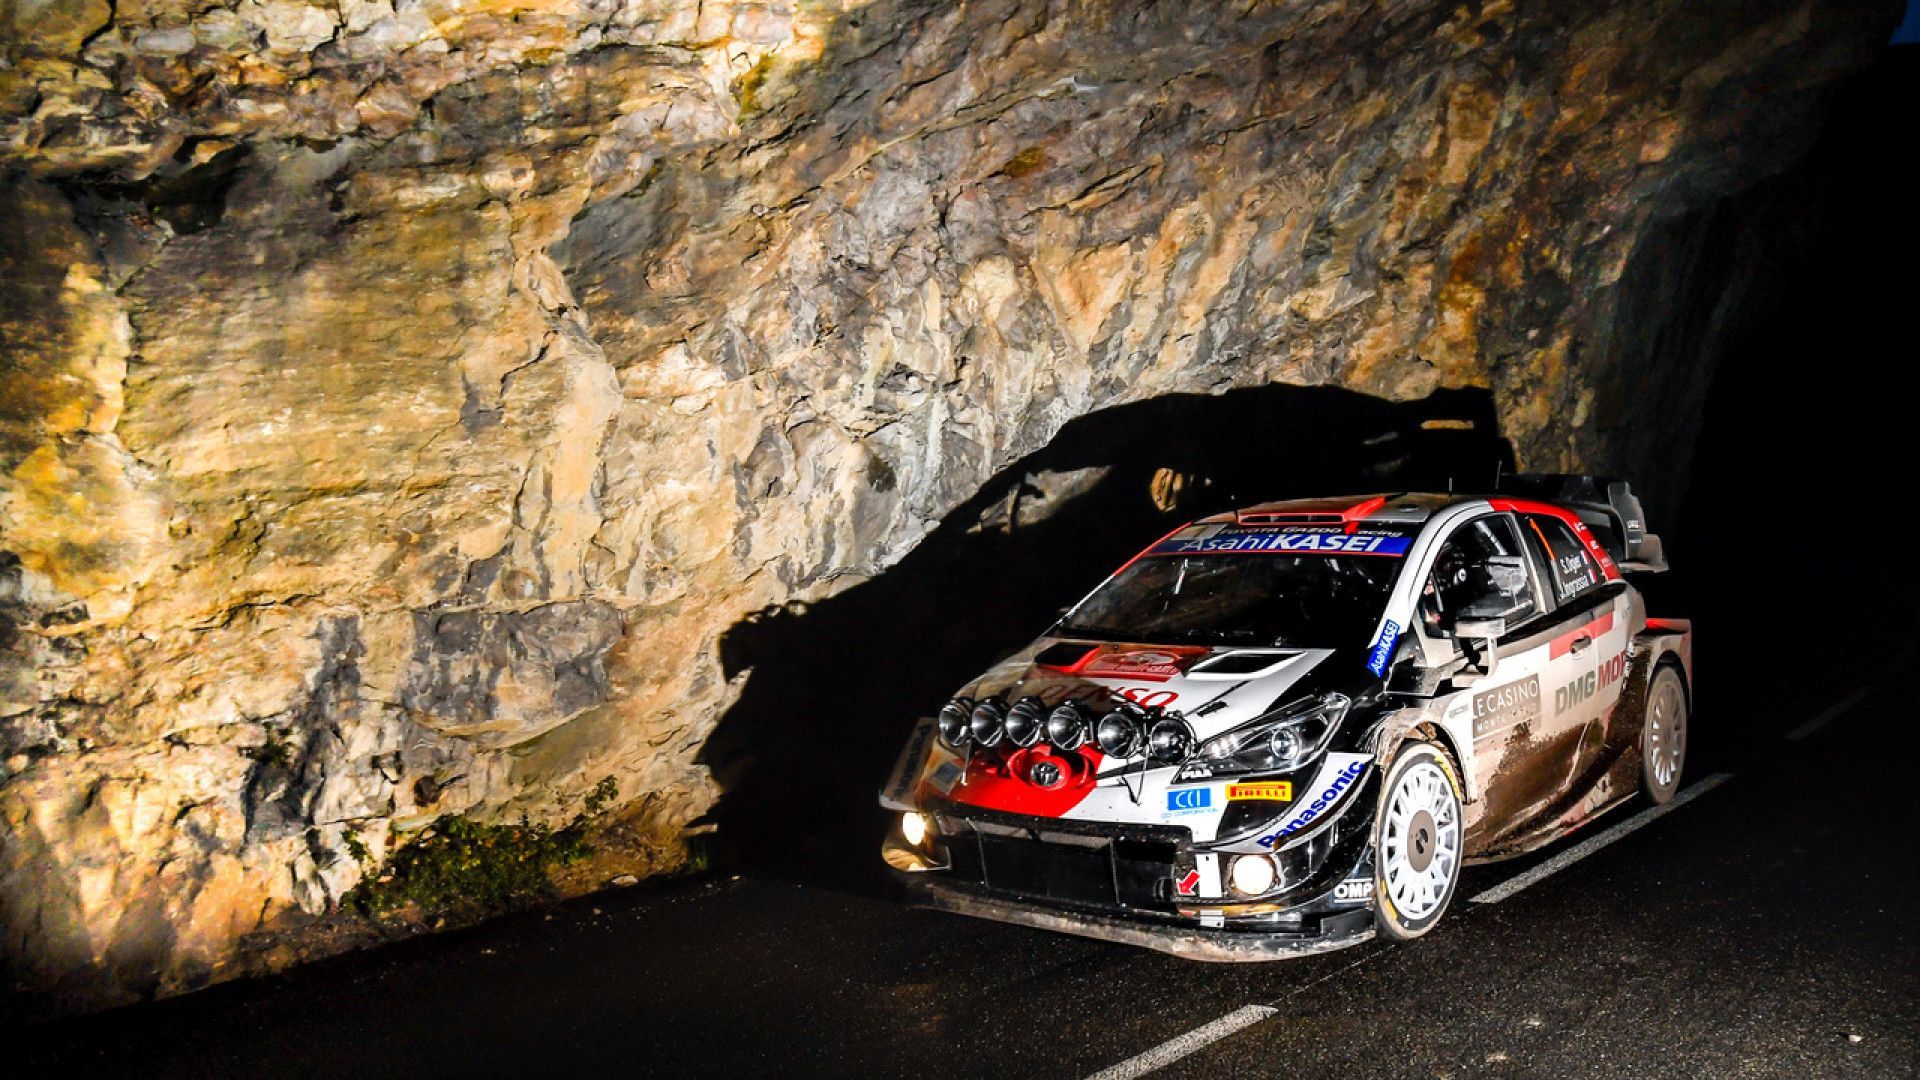 Ogier Leads Monte Carlo After Clean Sweepwrc.com